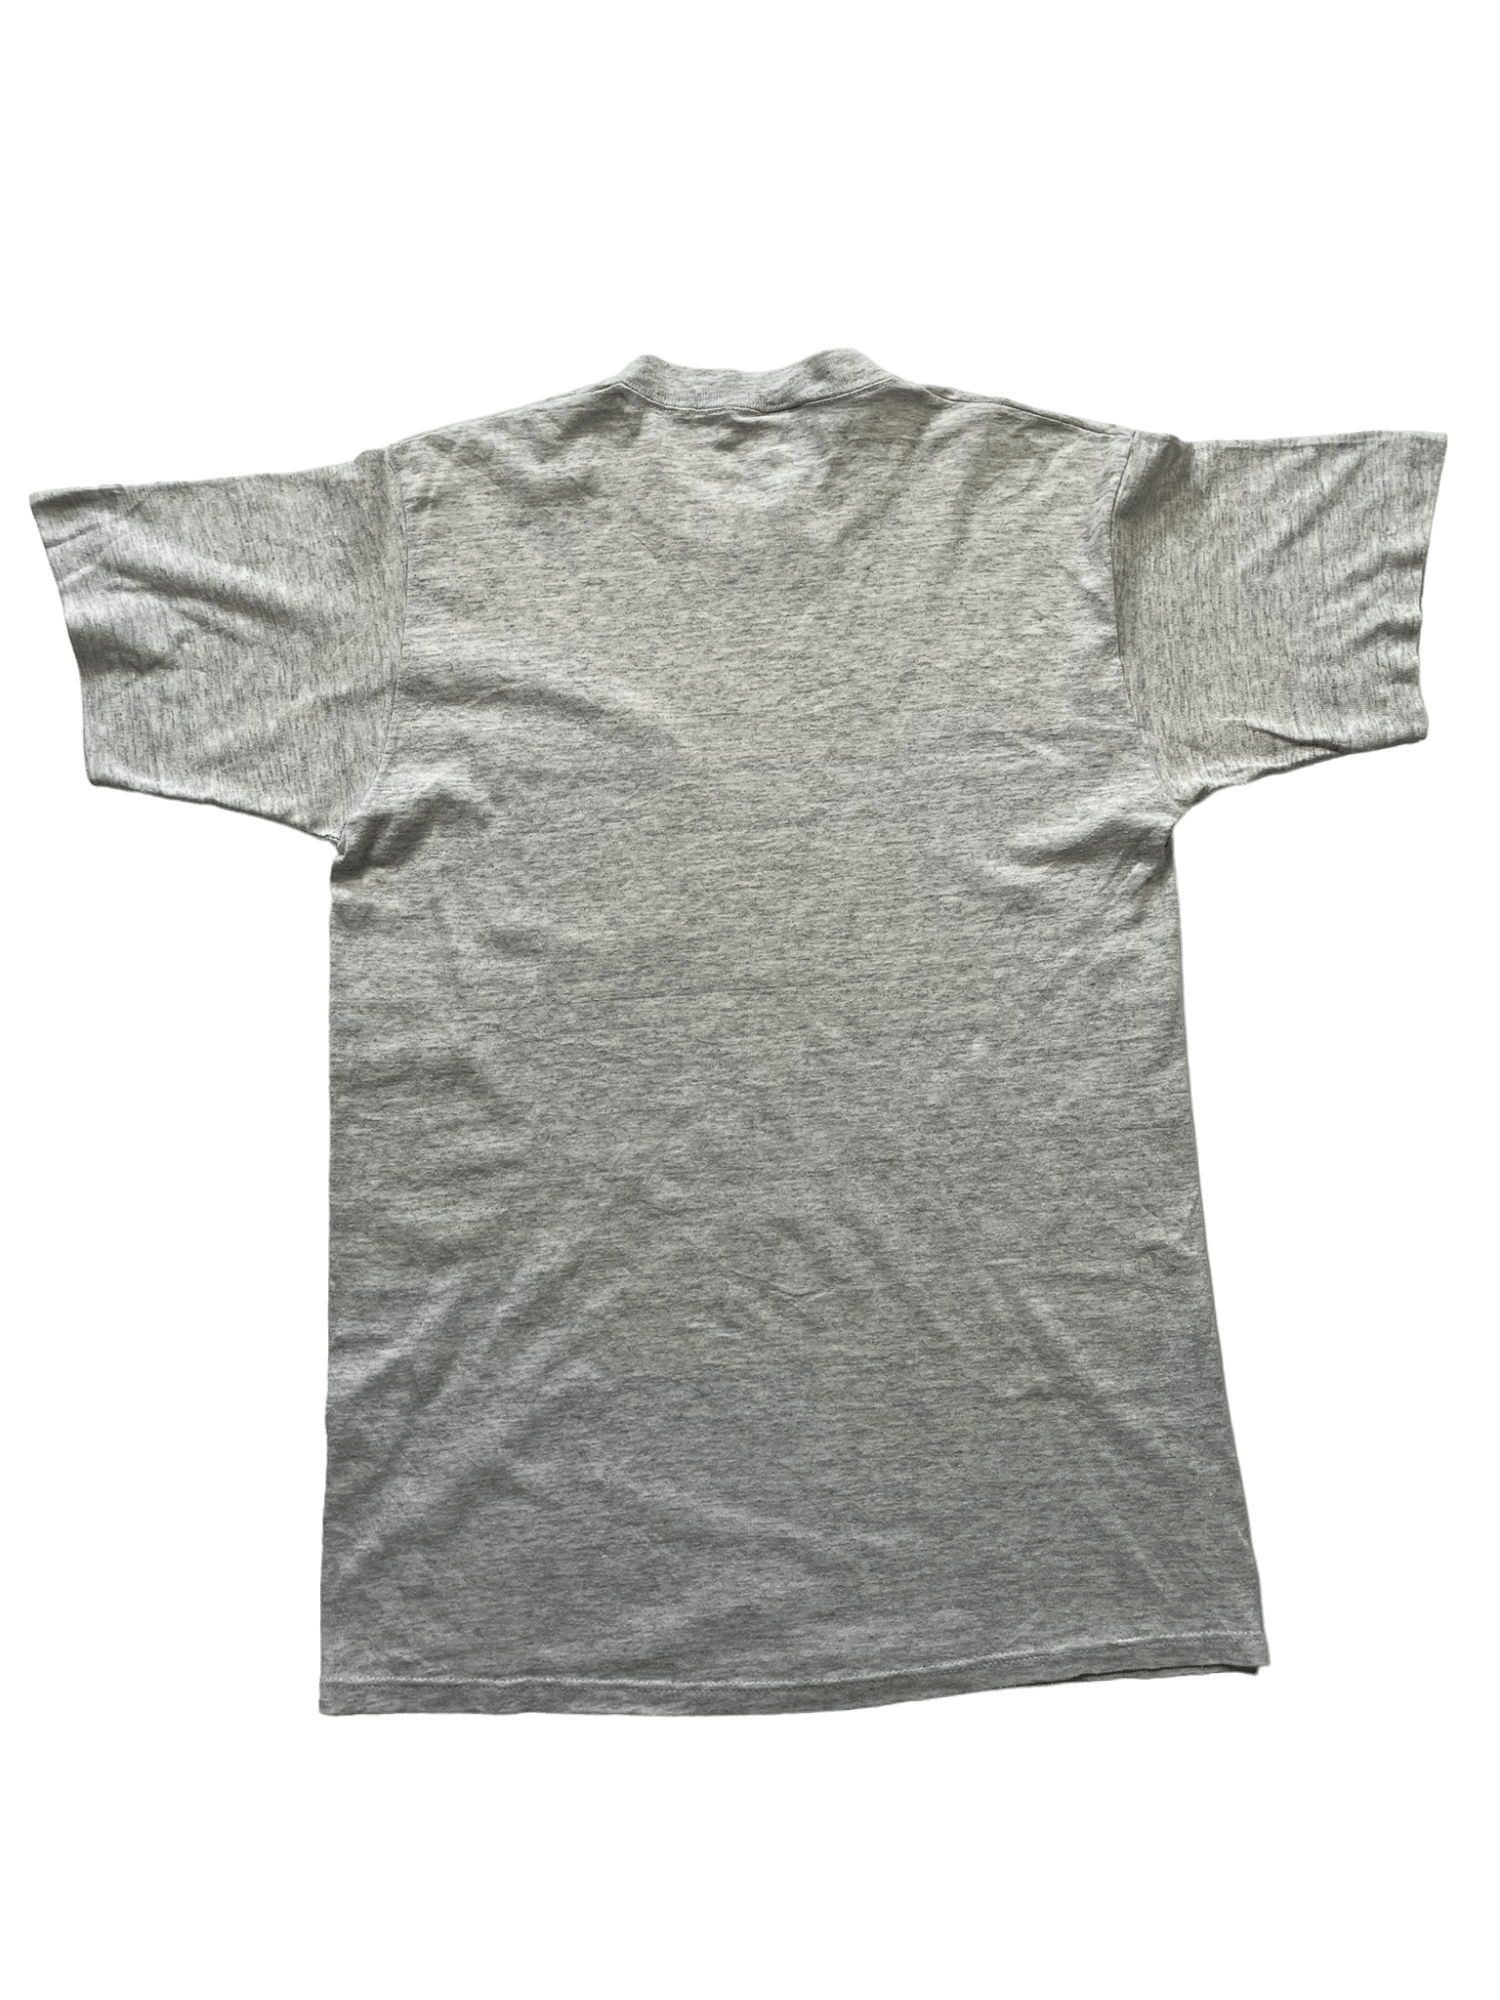 The Vintage Racks T-Shirt Heather Gray Curry's Energy - L